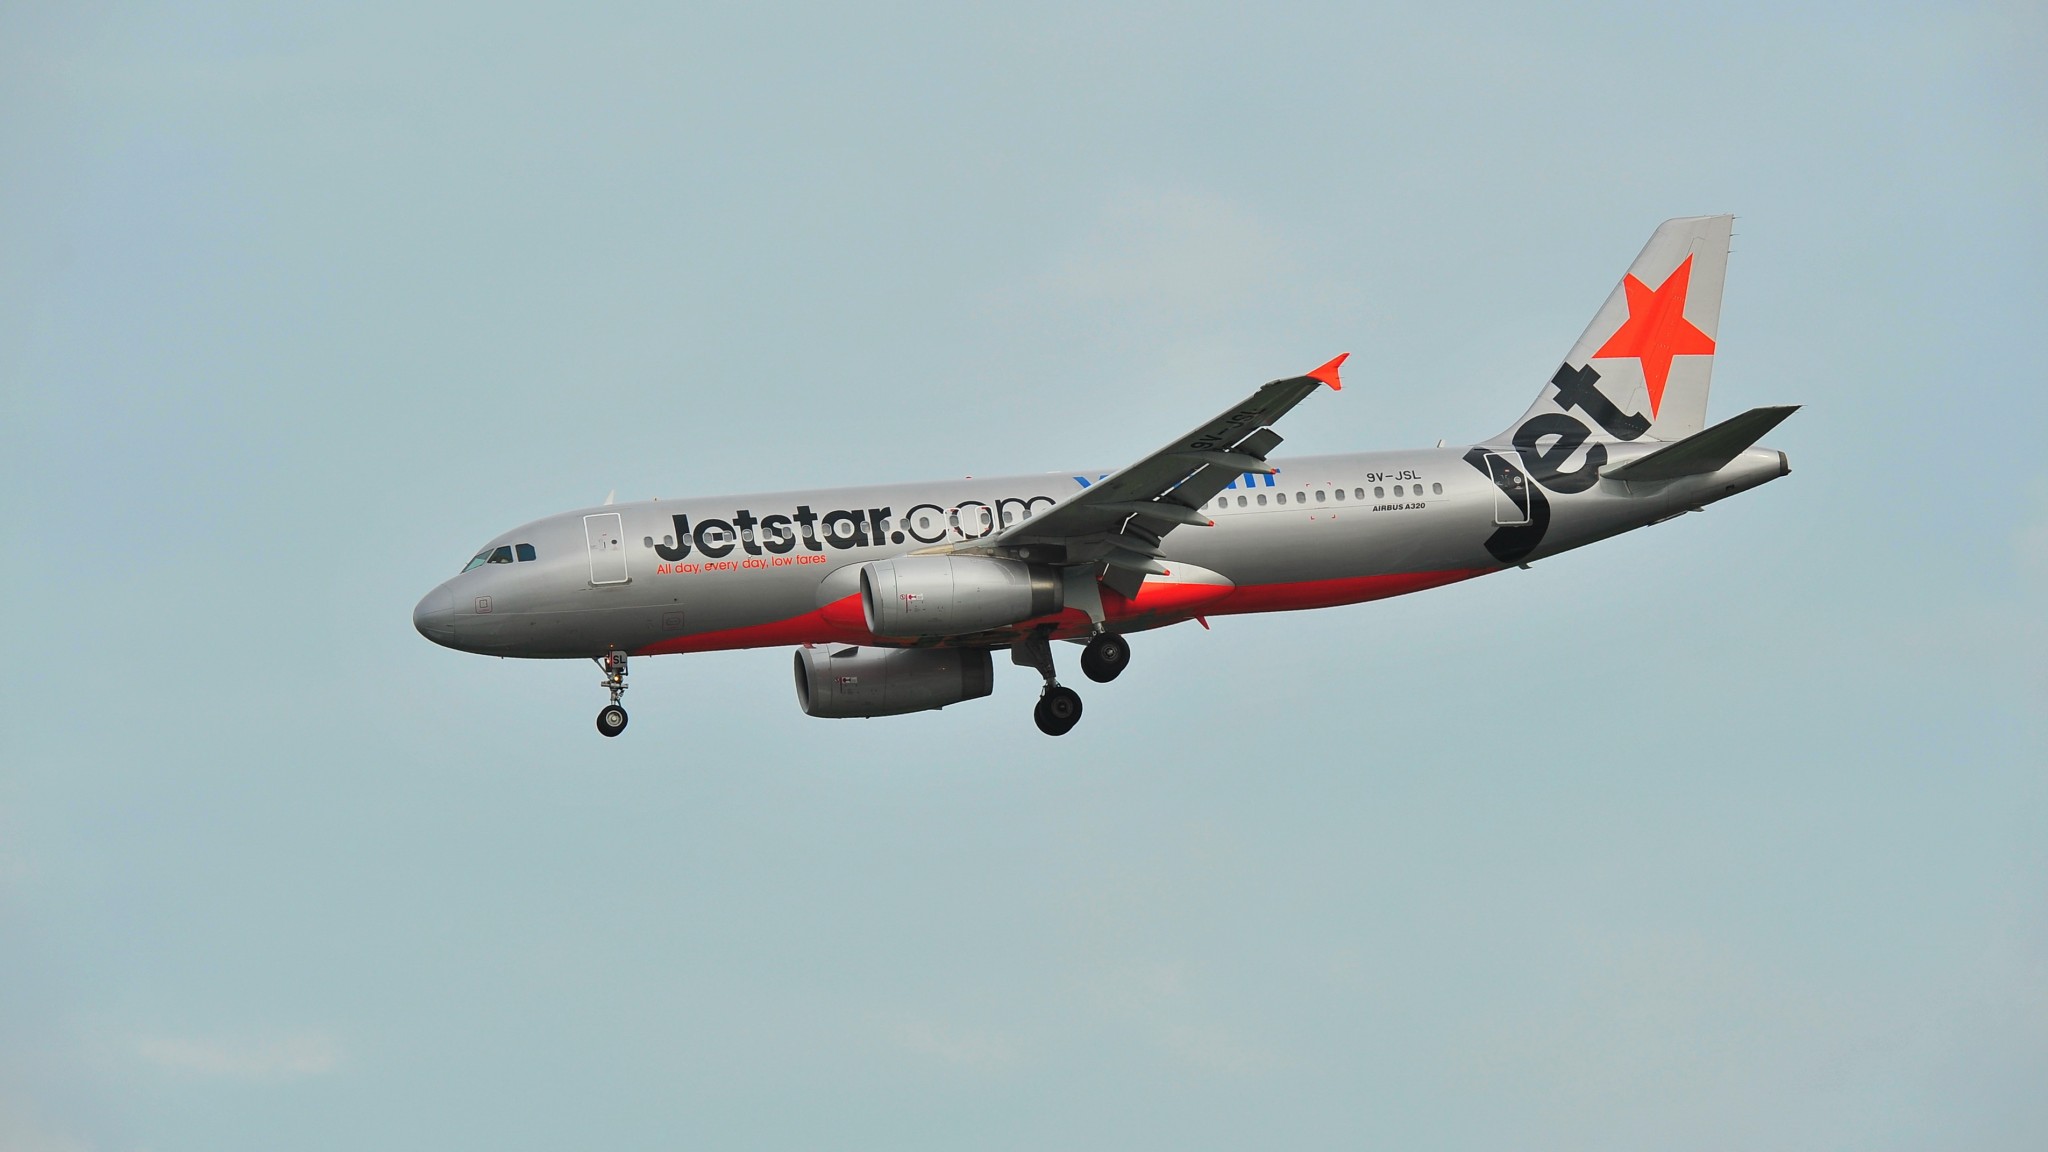 ACCC grants reauthorization between Jetstar Asian JVs to coordinate flights and prices